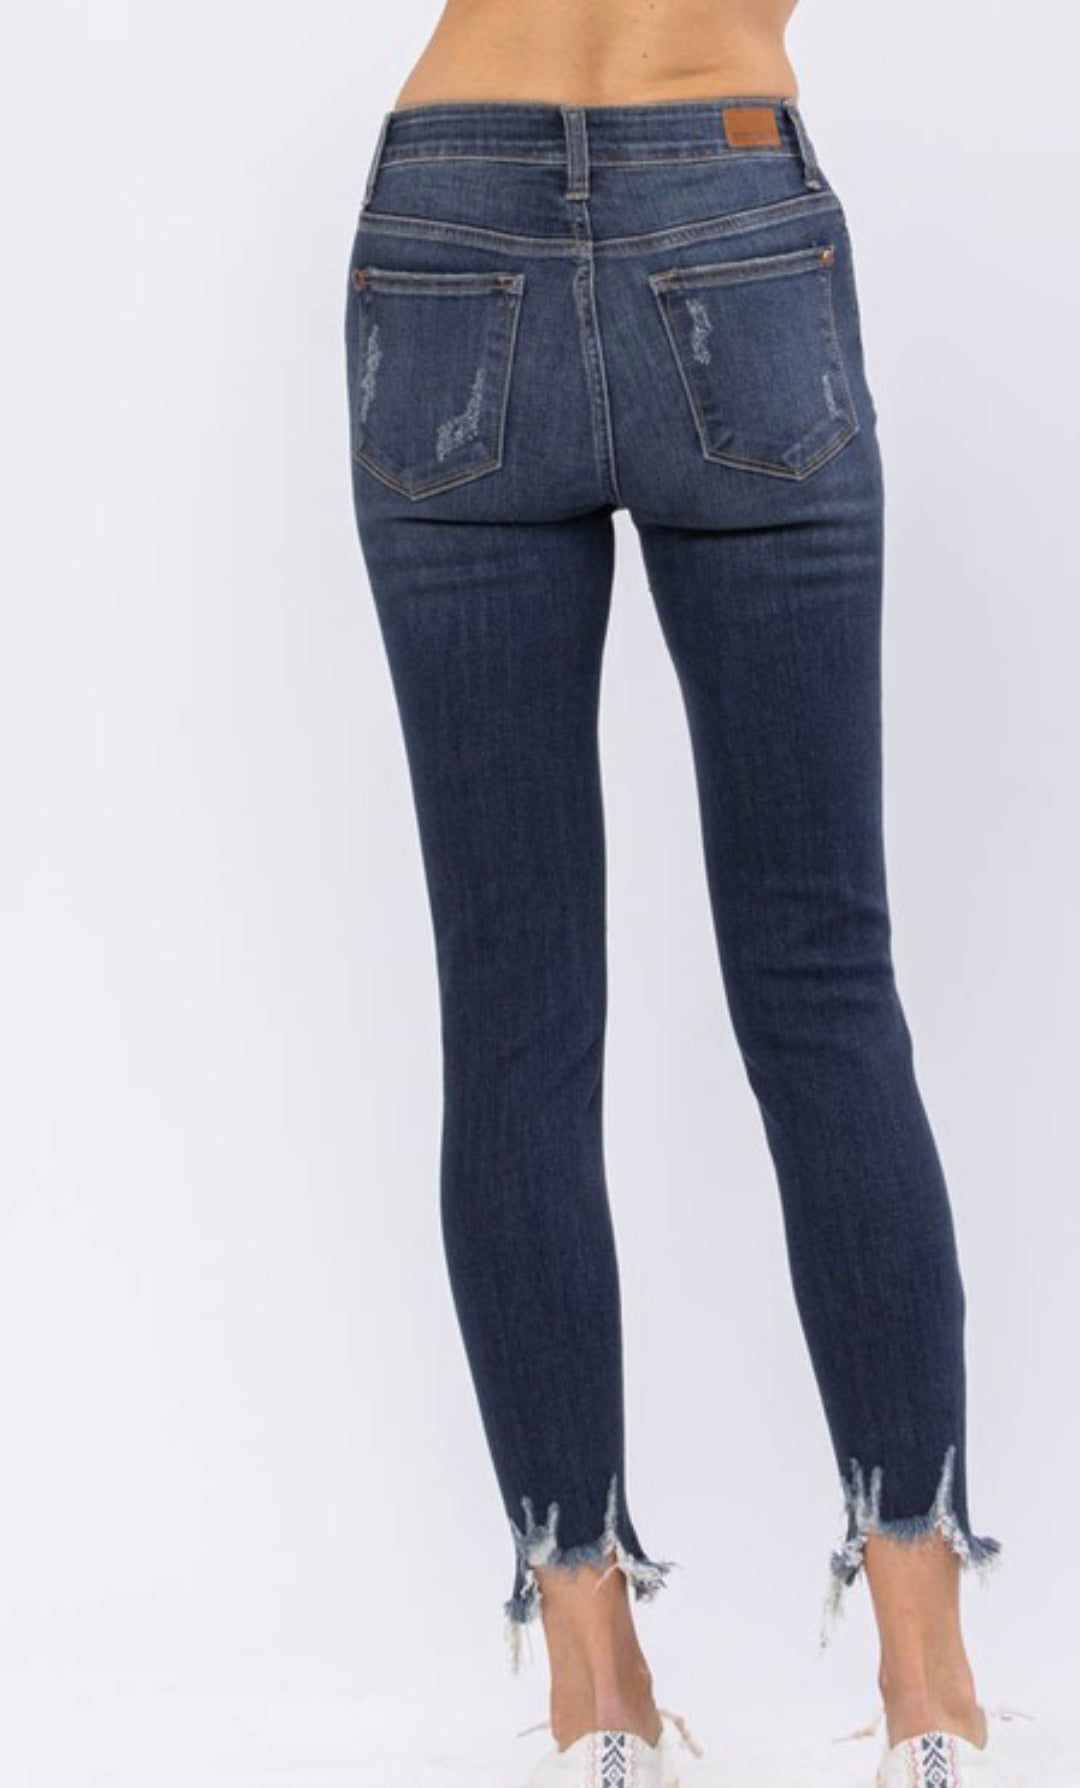 Judy Blue Waves Of Love Jeans